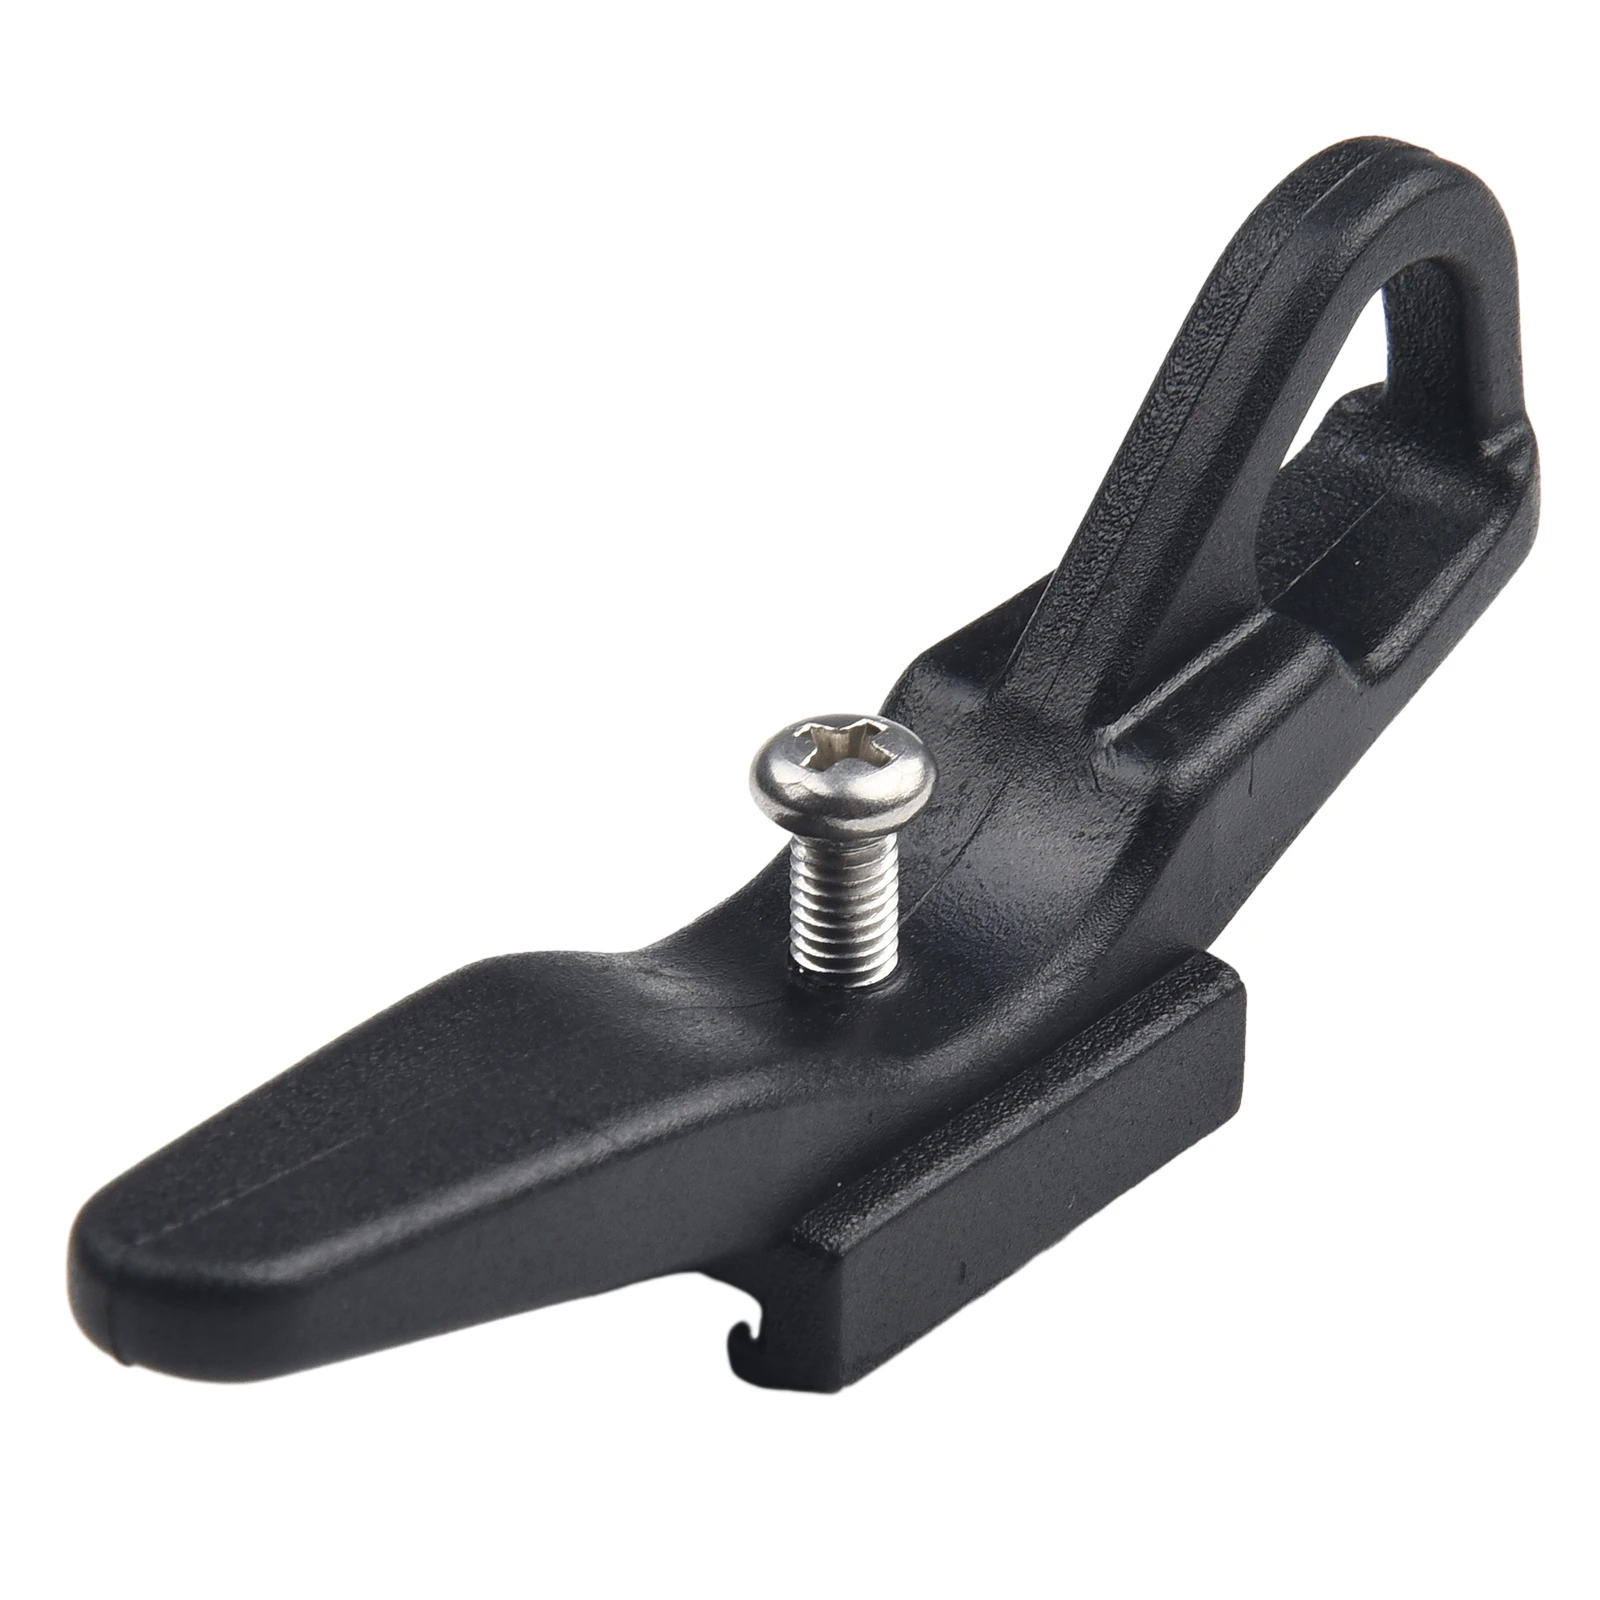 

Suitable for yachts and For ships Nylon made Small Sheep's Horn black plastic splint takes you to the next level